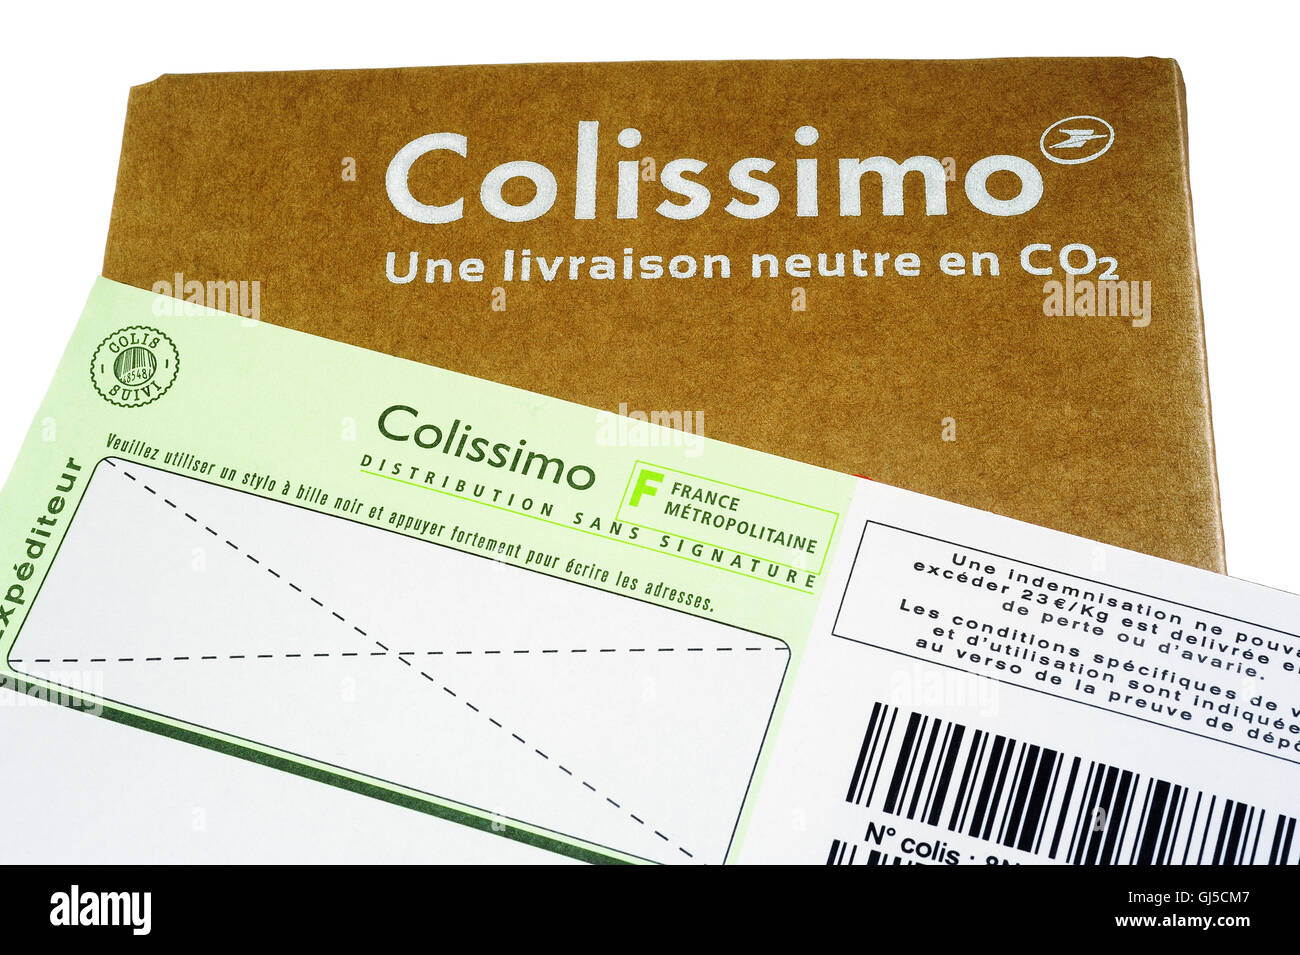 Mailing carton sold by the French Post for sending in France and followed by bar code with an insurance in case of loss. Stock Photo